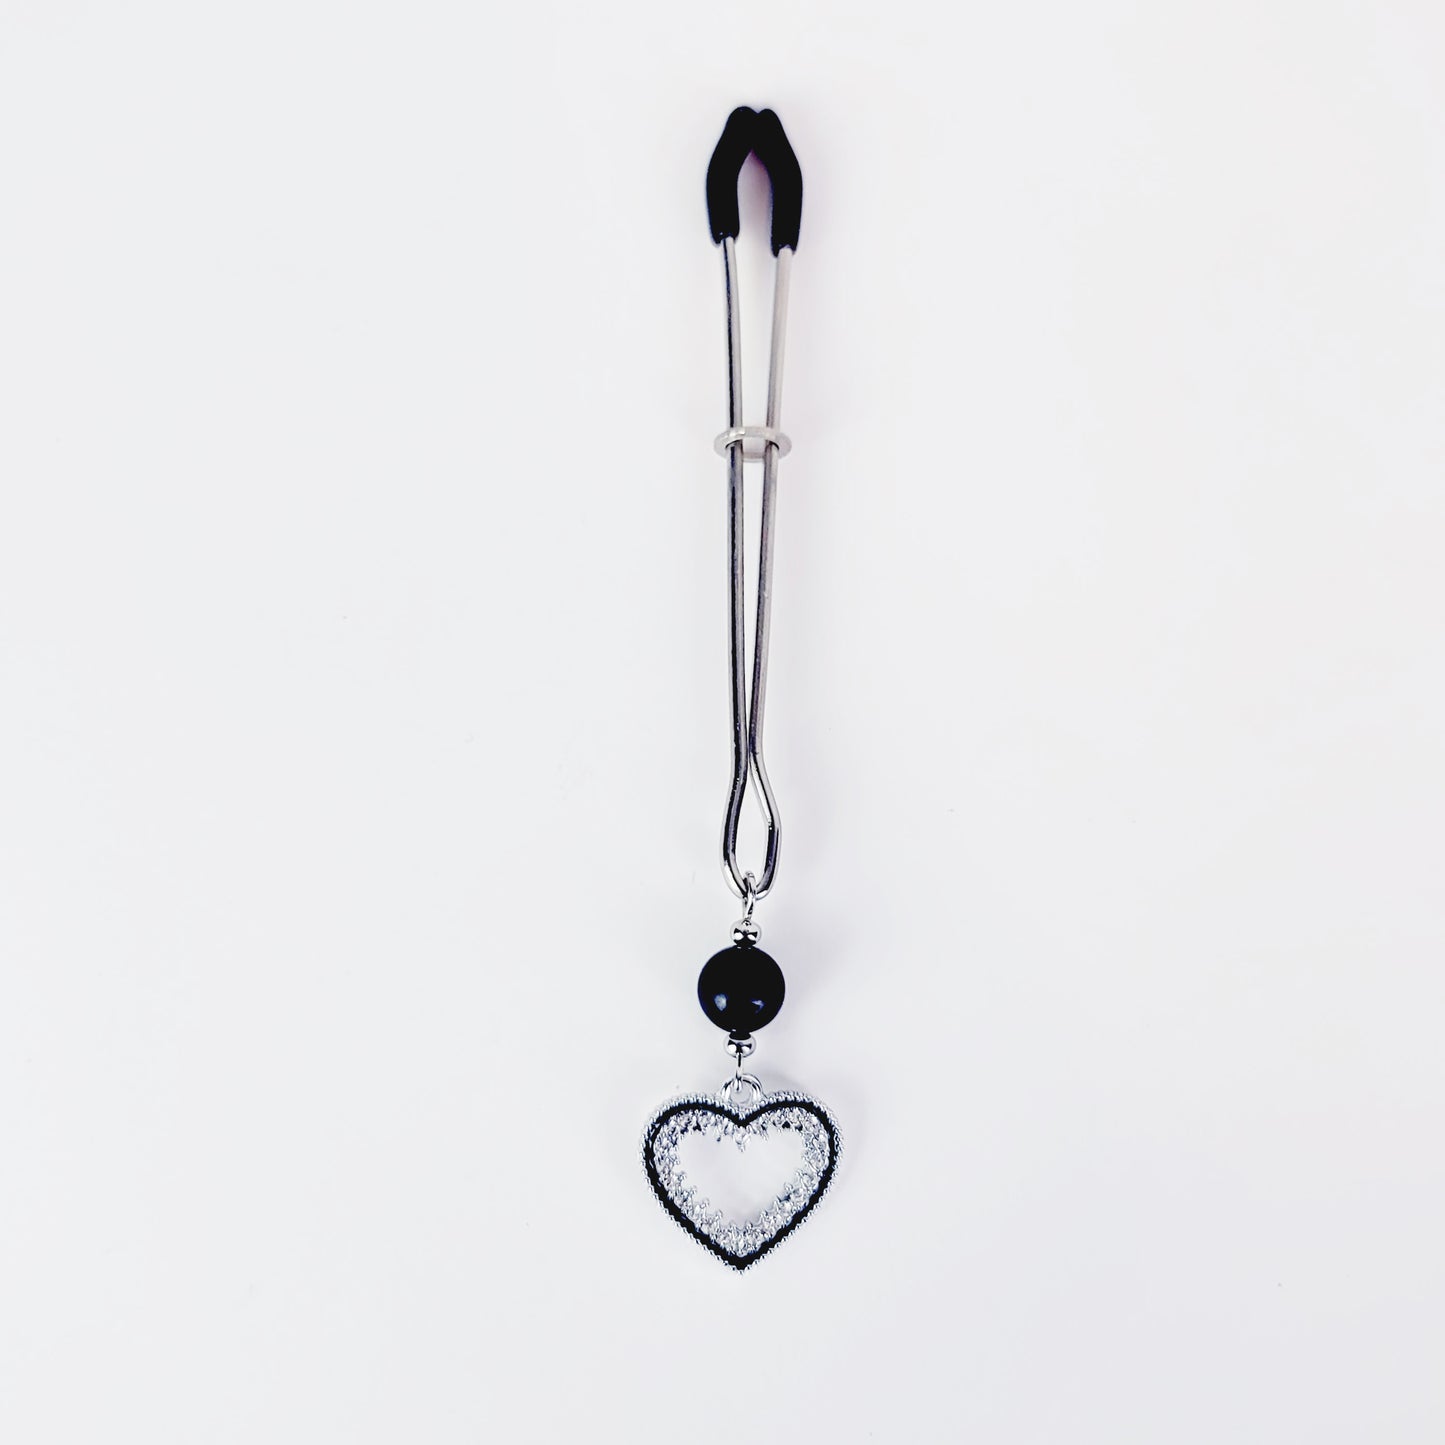 Tweezer Clit Clamp with Sparkling Heart and Black Obsidian. Clitoral Clamp For BDSM Submissive Women.